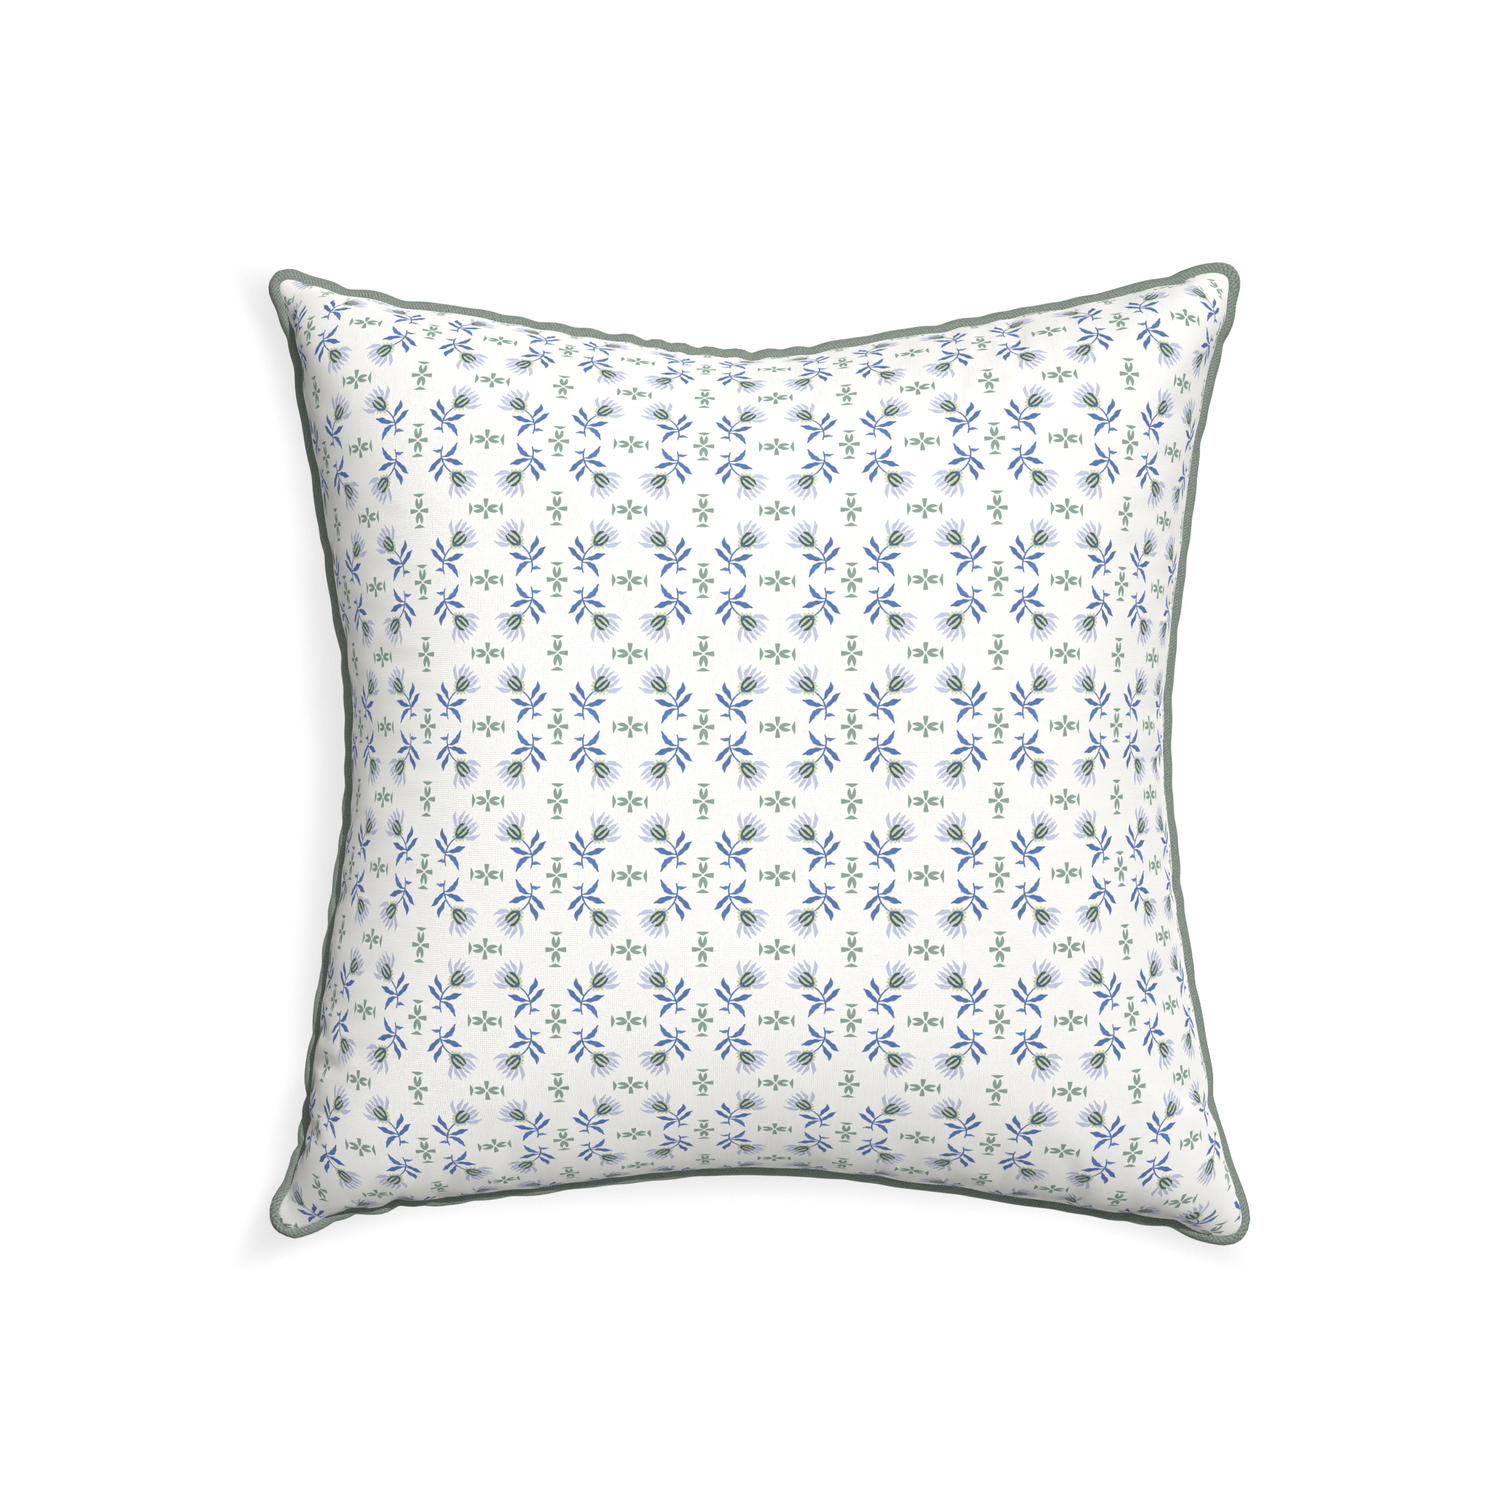 22-square lee custom blue & green floralpillow with sage piping on white background